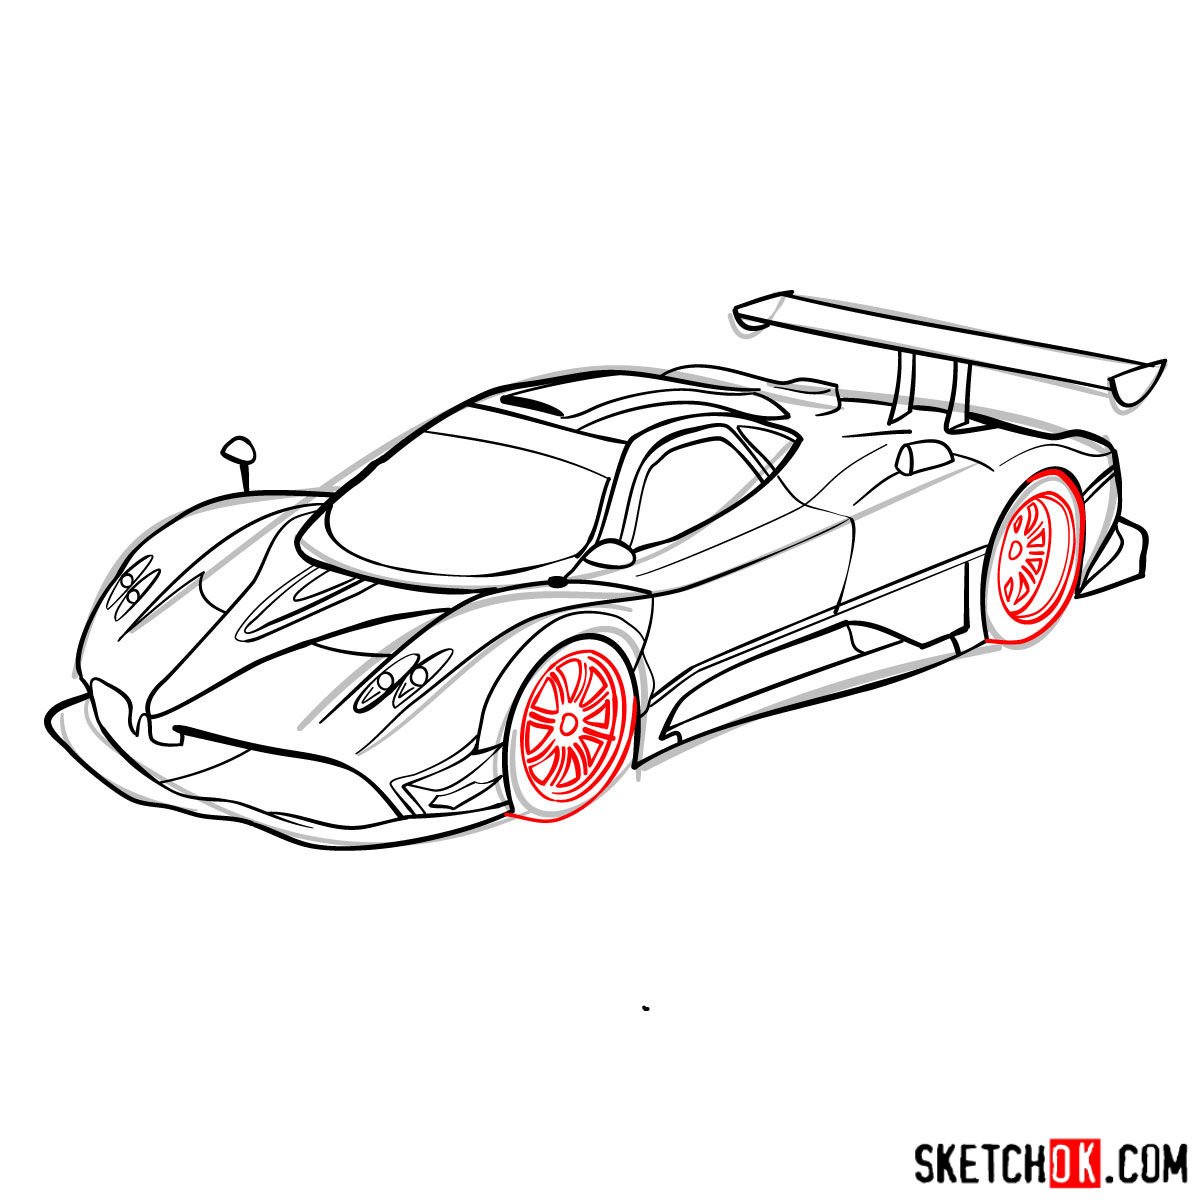 How to draw Pagani Zonda - Sketchok easy drawing guides